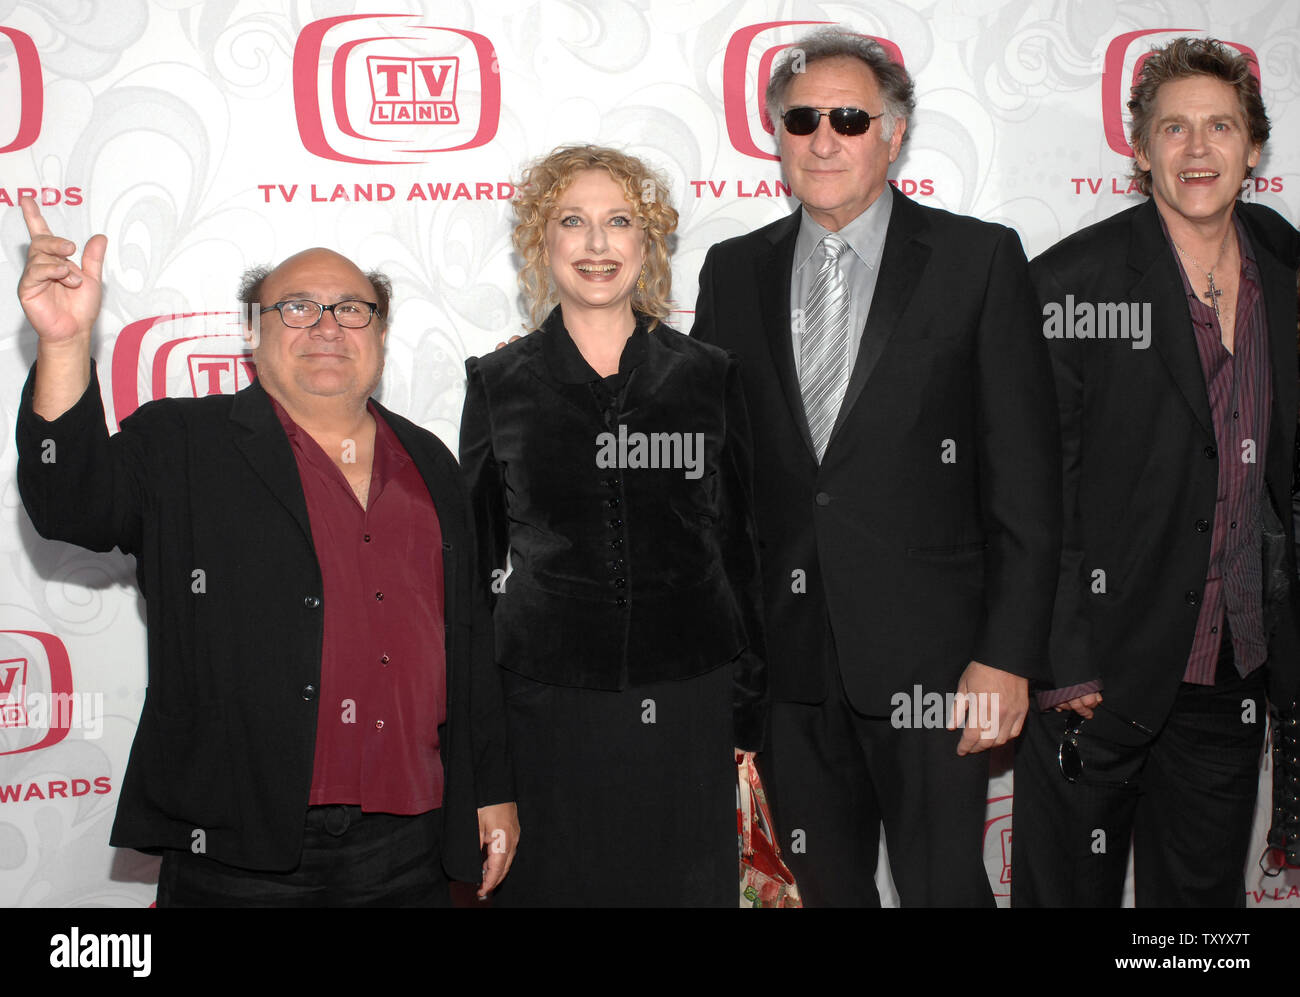 Actor Dannny DeVito waves as his fellow 'Taxi' cast members Judd Hersch, Carol Kane and Jeff Conaway (L-R) gather during the 5th annual TV Land Awards at Barker Hanger in Santa Monica, California on April 14, 2007. (UPI Photo/Jim Ruymen) Stock Photo